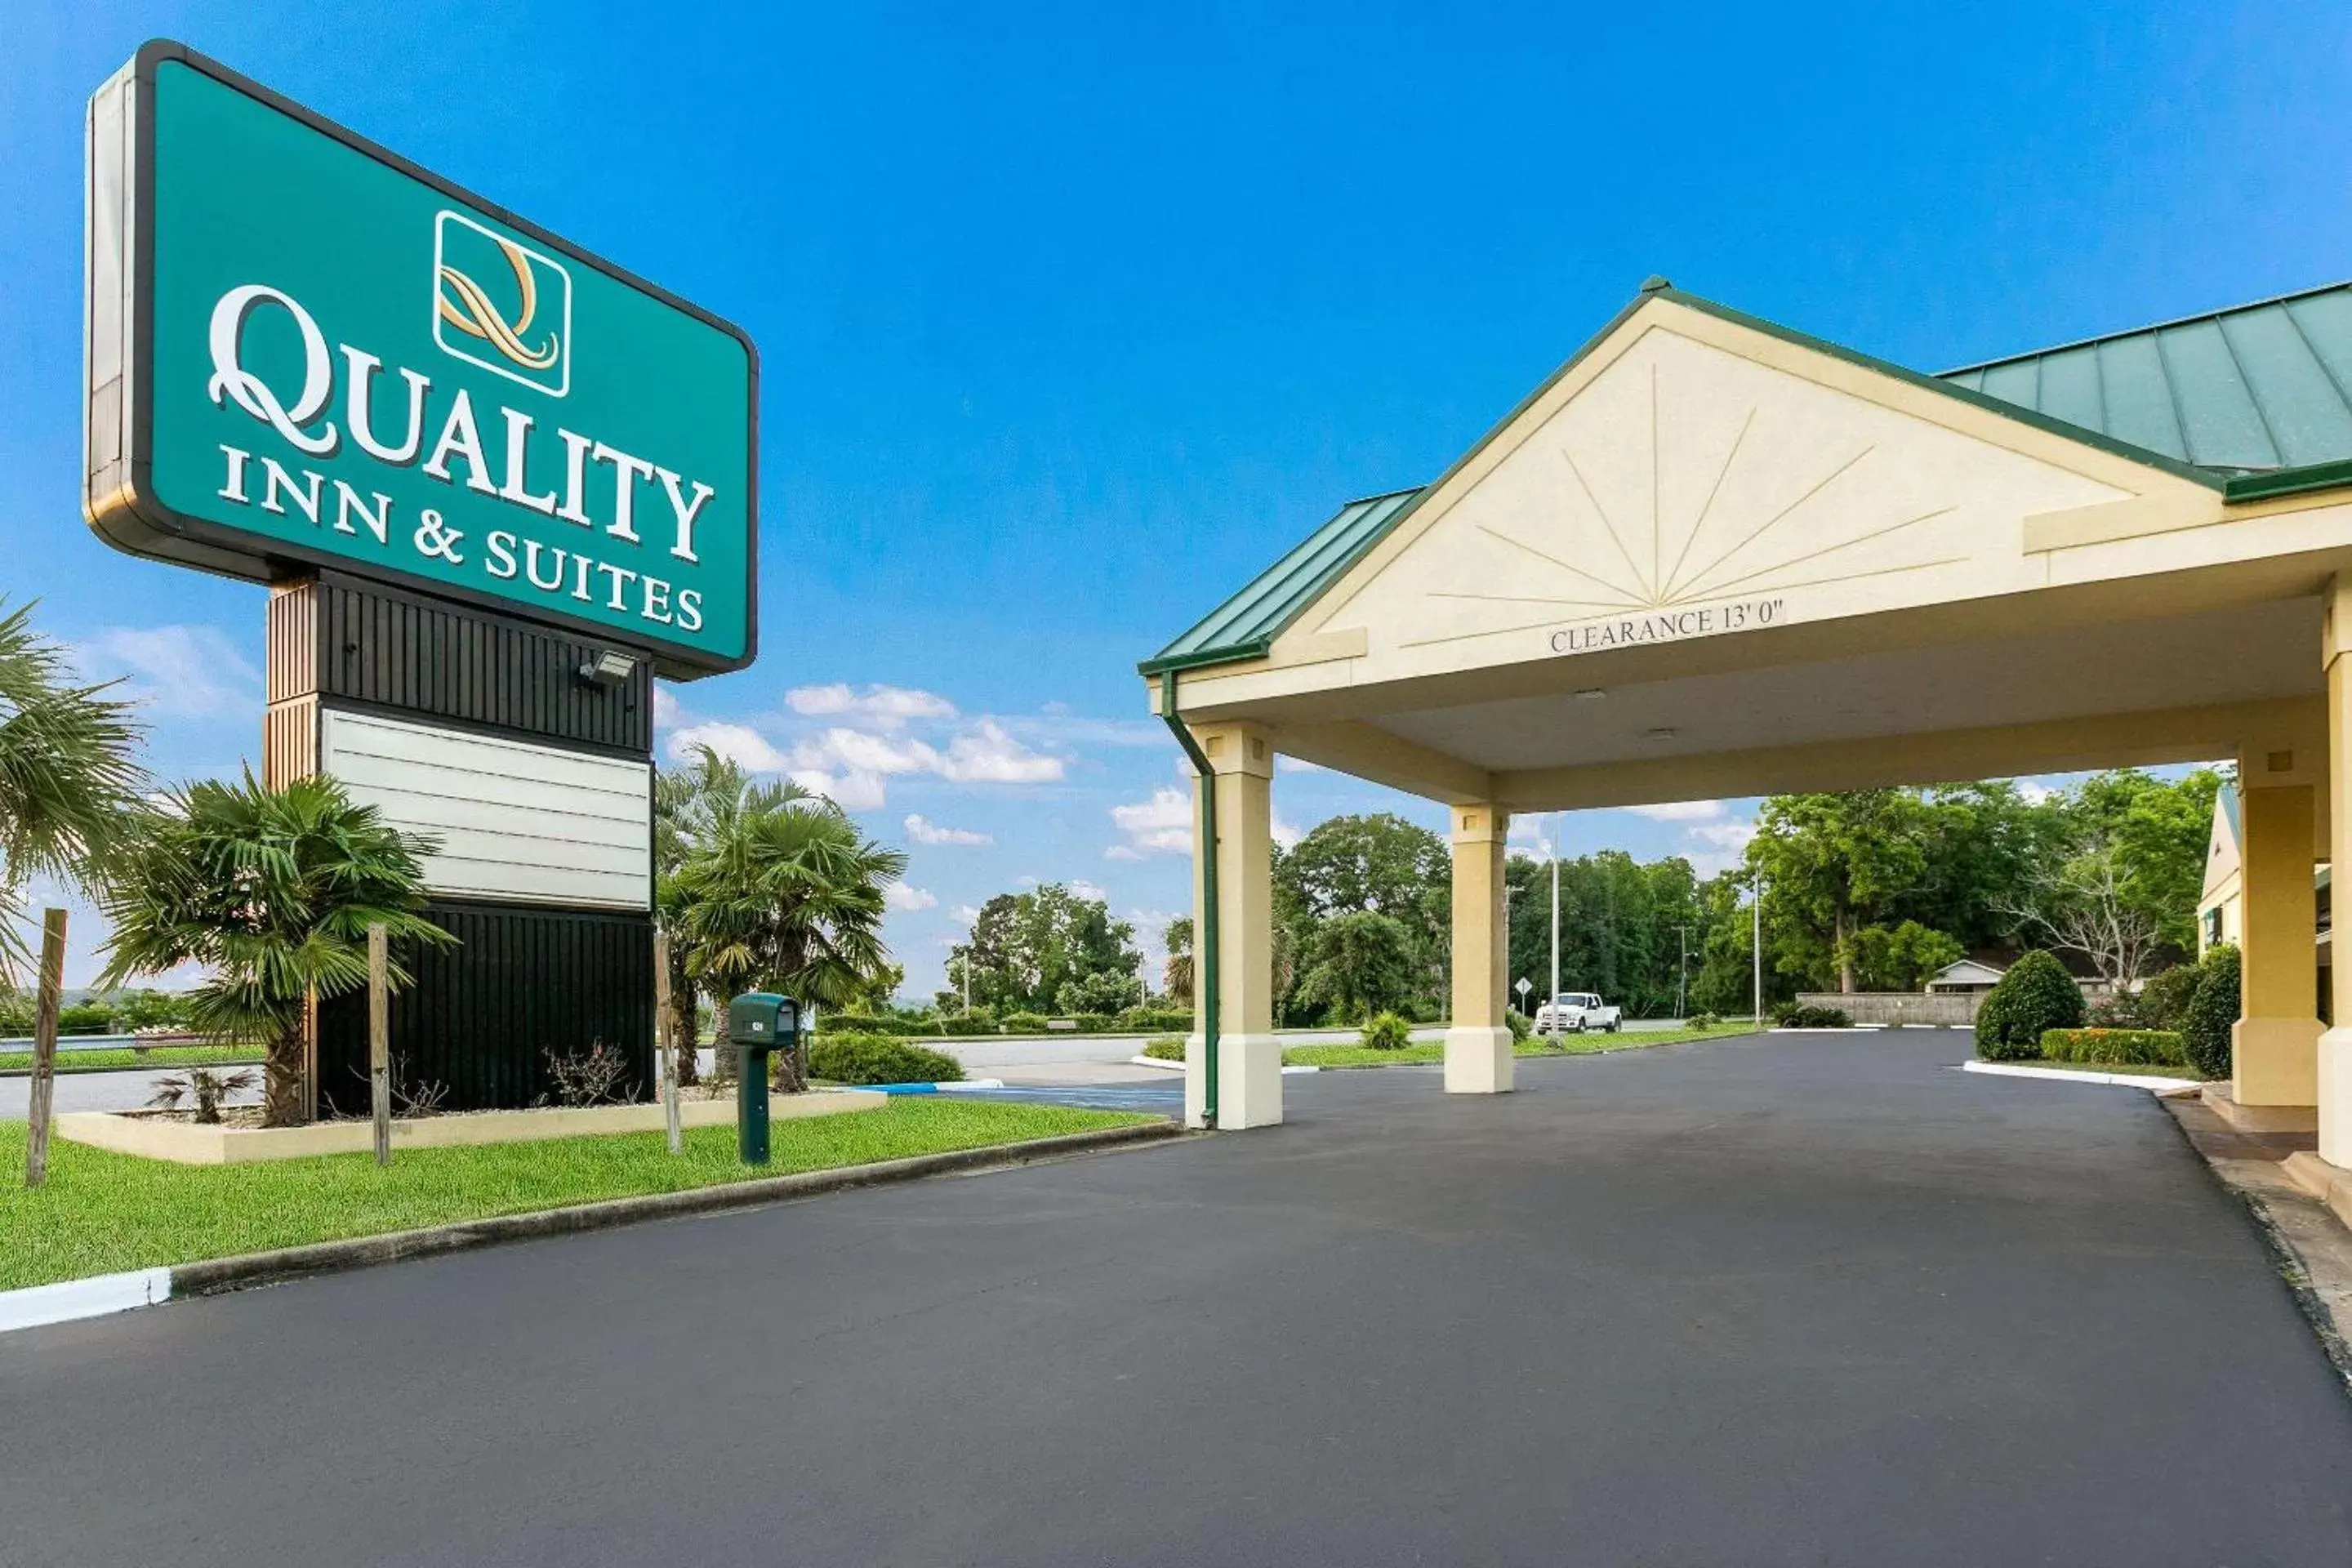 Property building, Property Logo/Sign in Quality Inn & Suites Eufaula